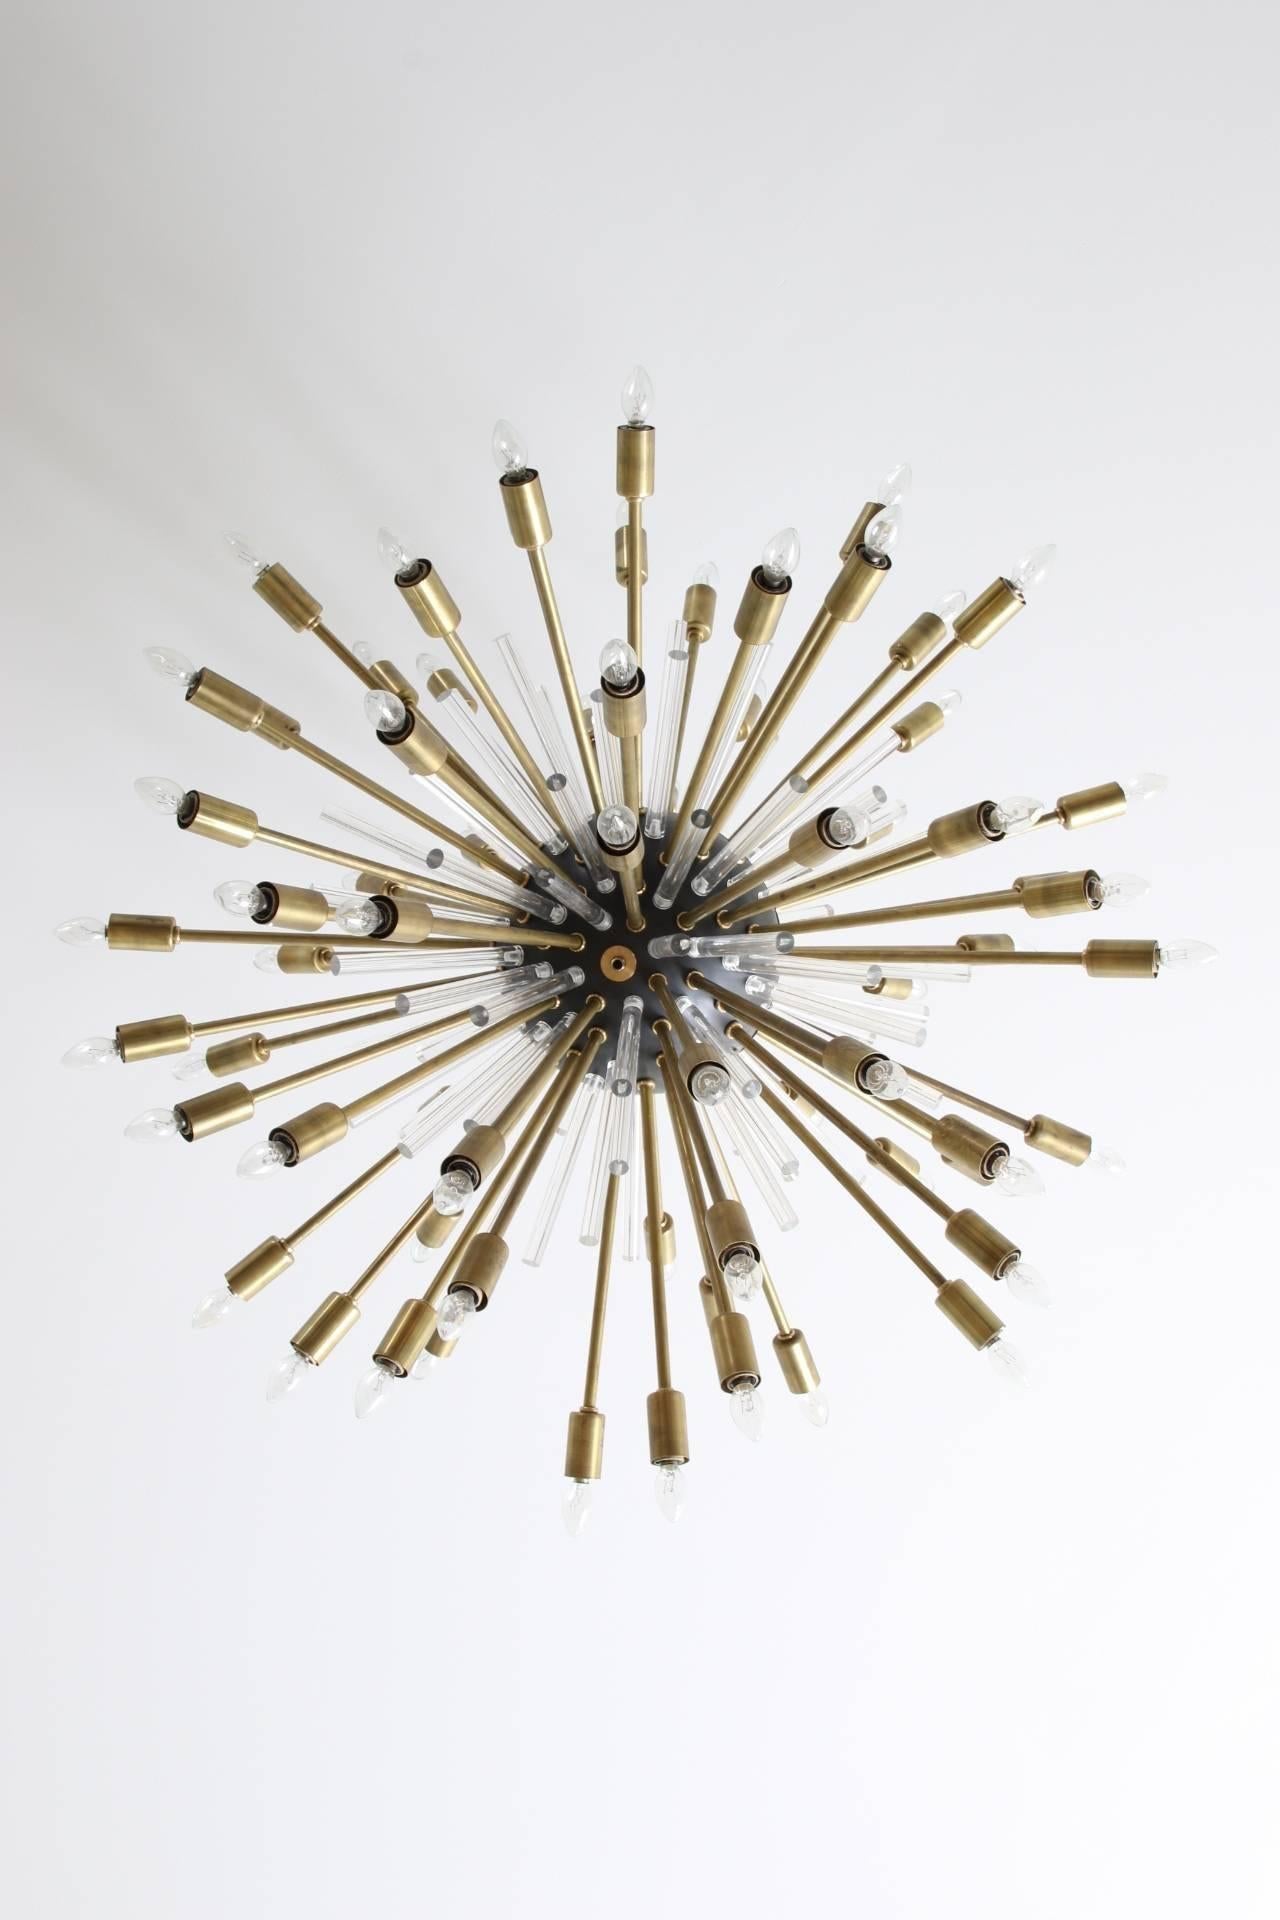 Sputnik style chandelier 'Nova' from Downtown's Classic collection.
148 Arms, 74 brass arms with light bulbs and 74 Lucite arms. Materials used are brass, oil rubbed bronze and lucite. Excellent condition.